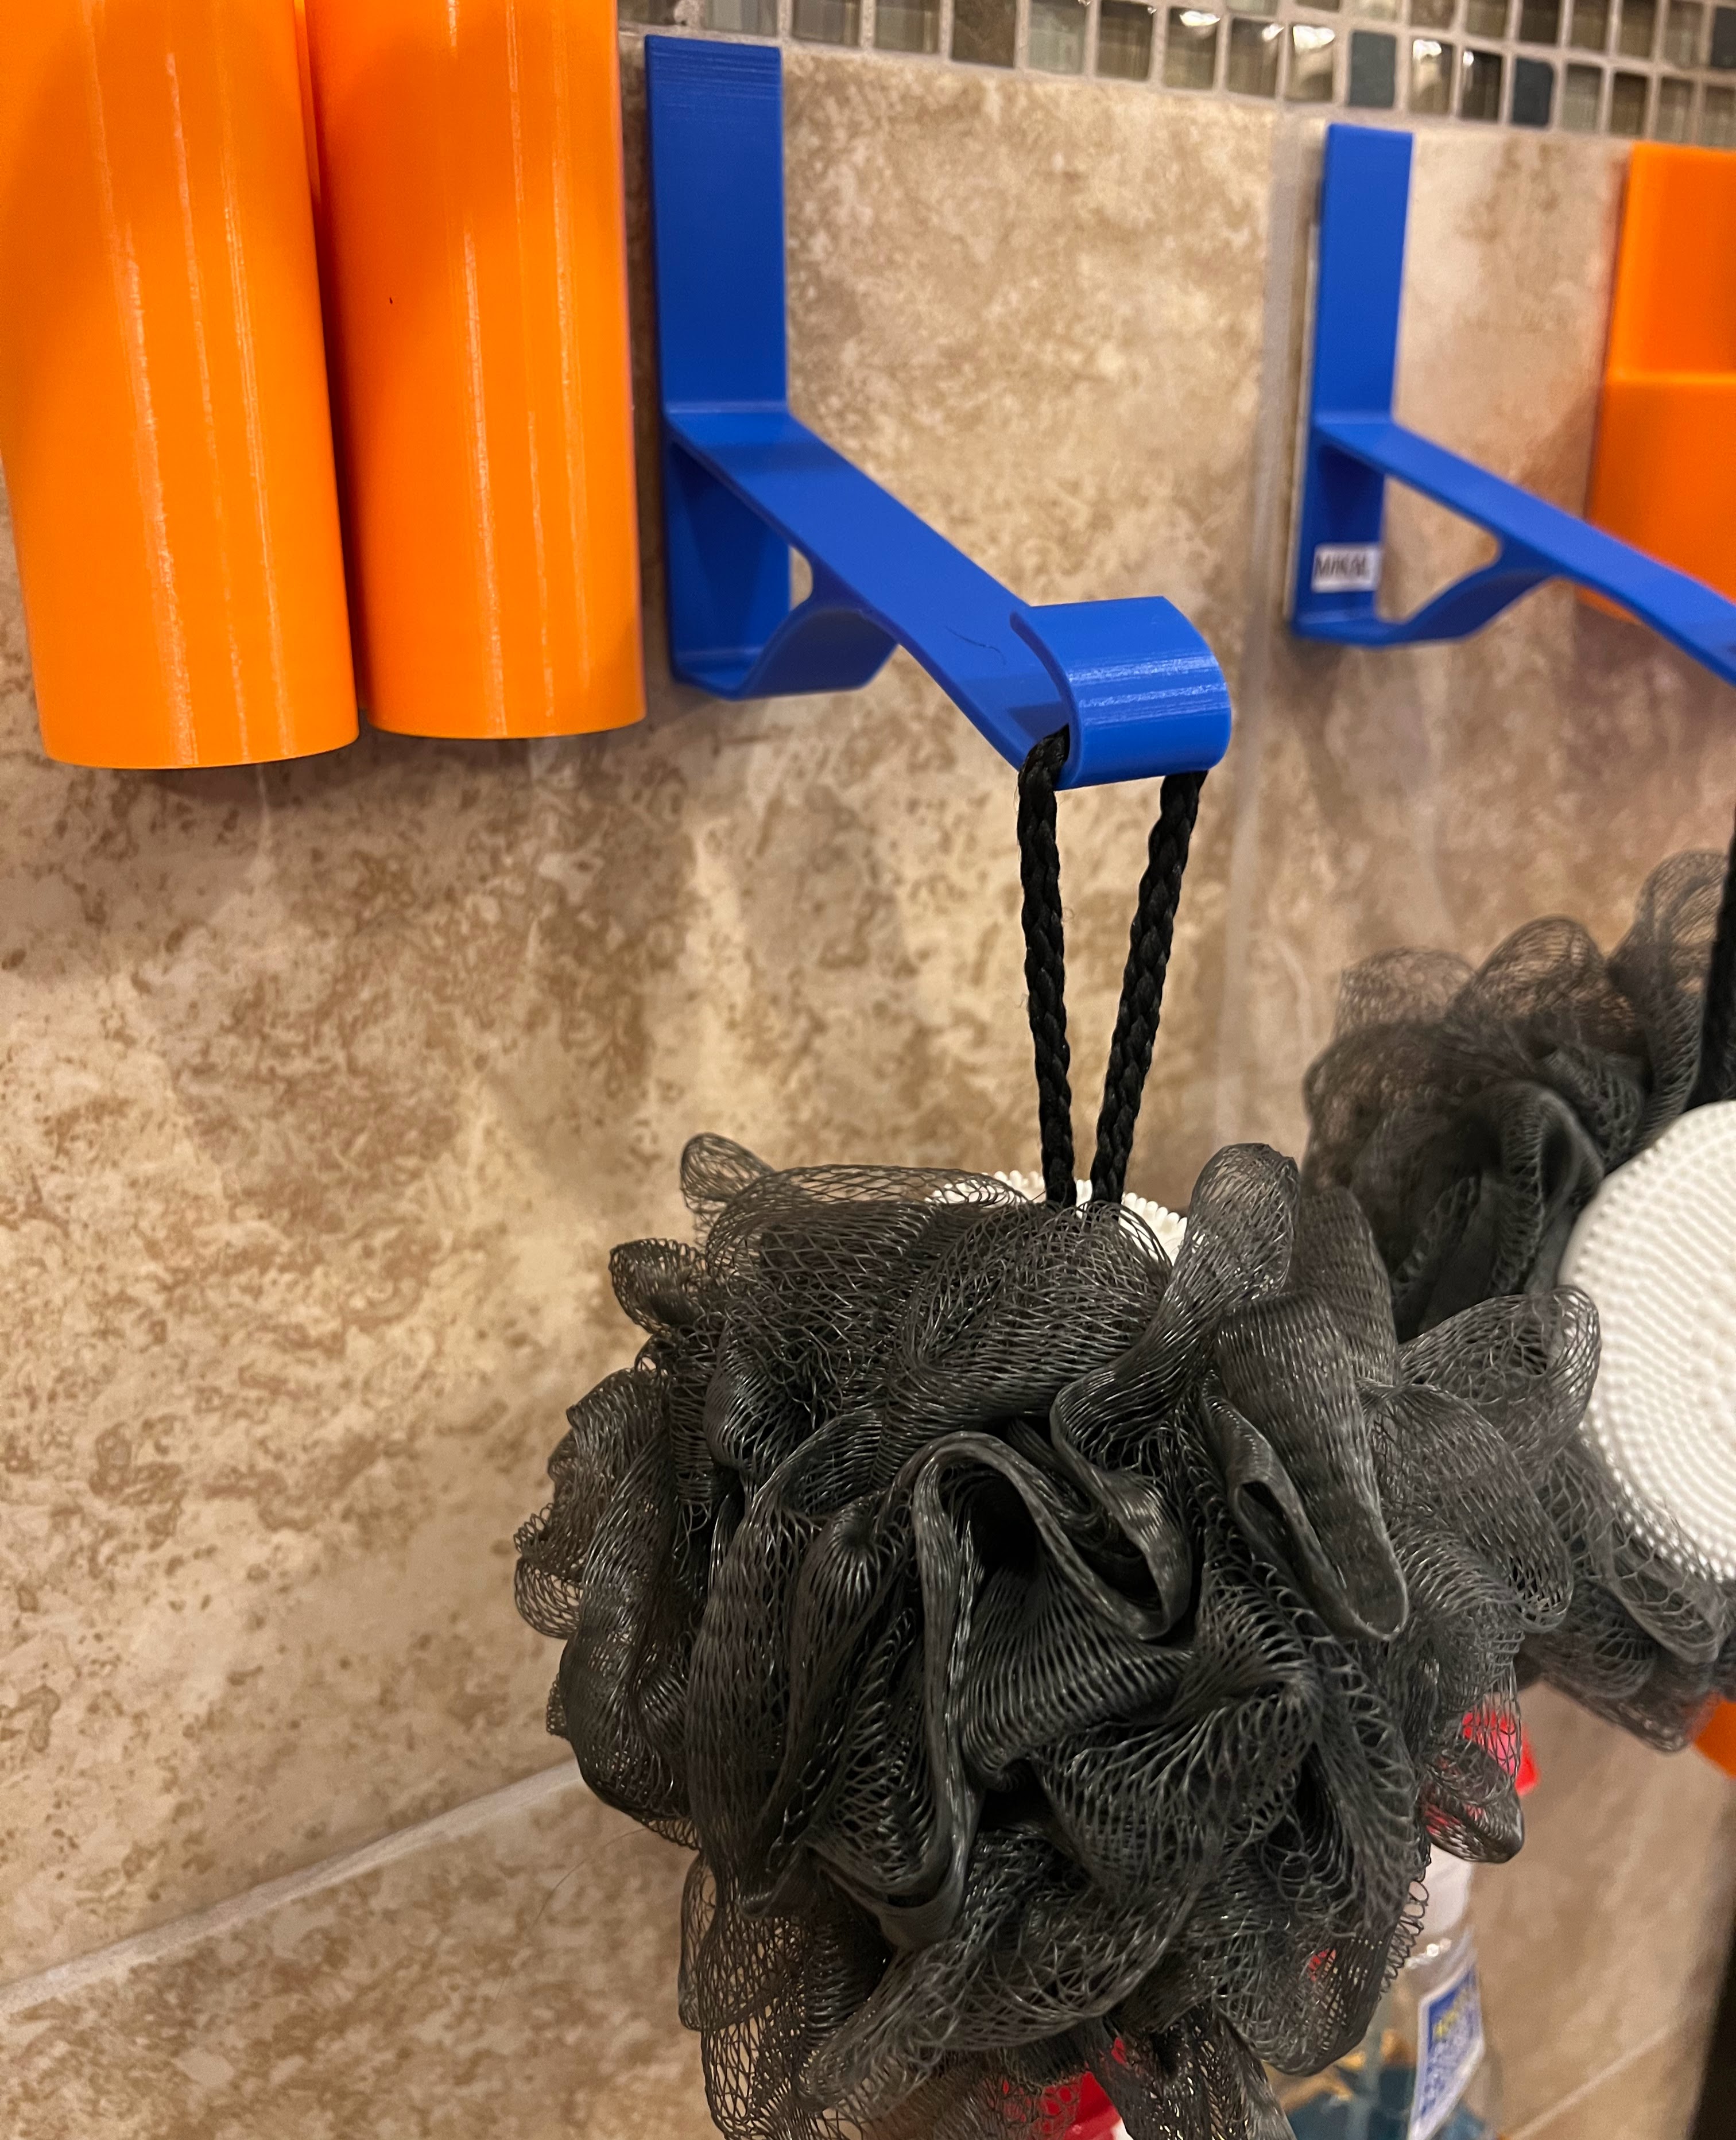 Photograph of functional 3D printed loofah shower wall hanger